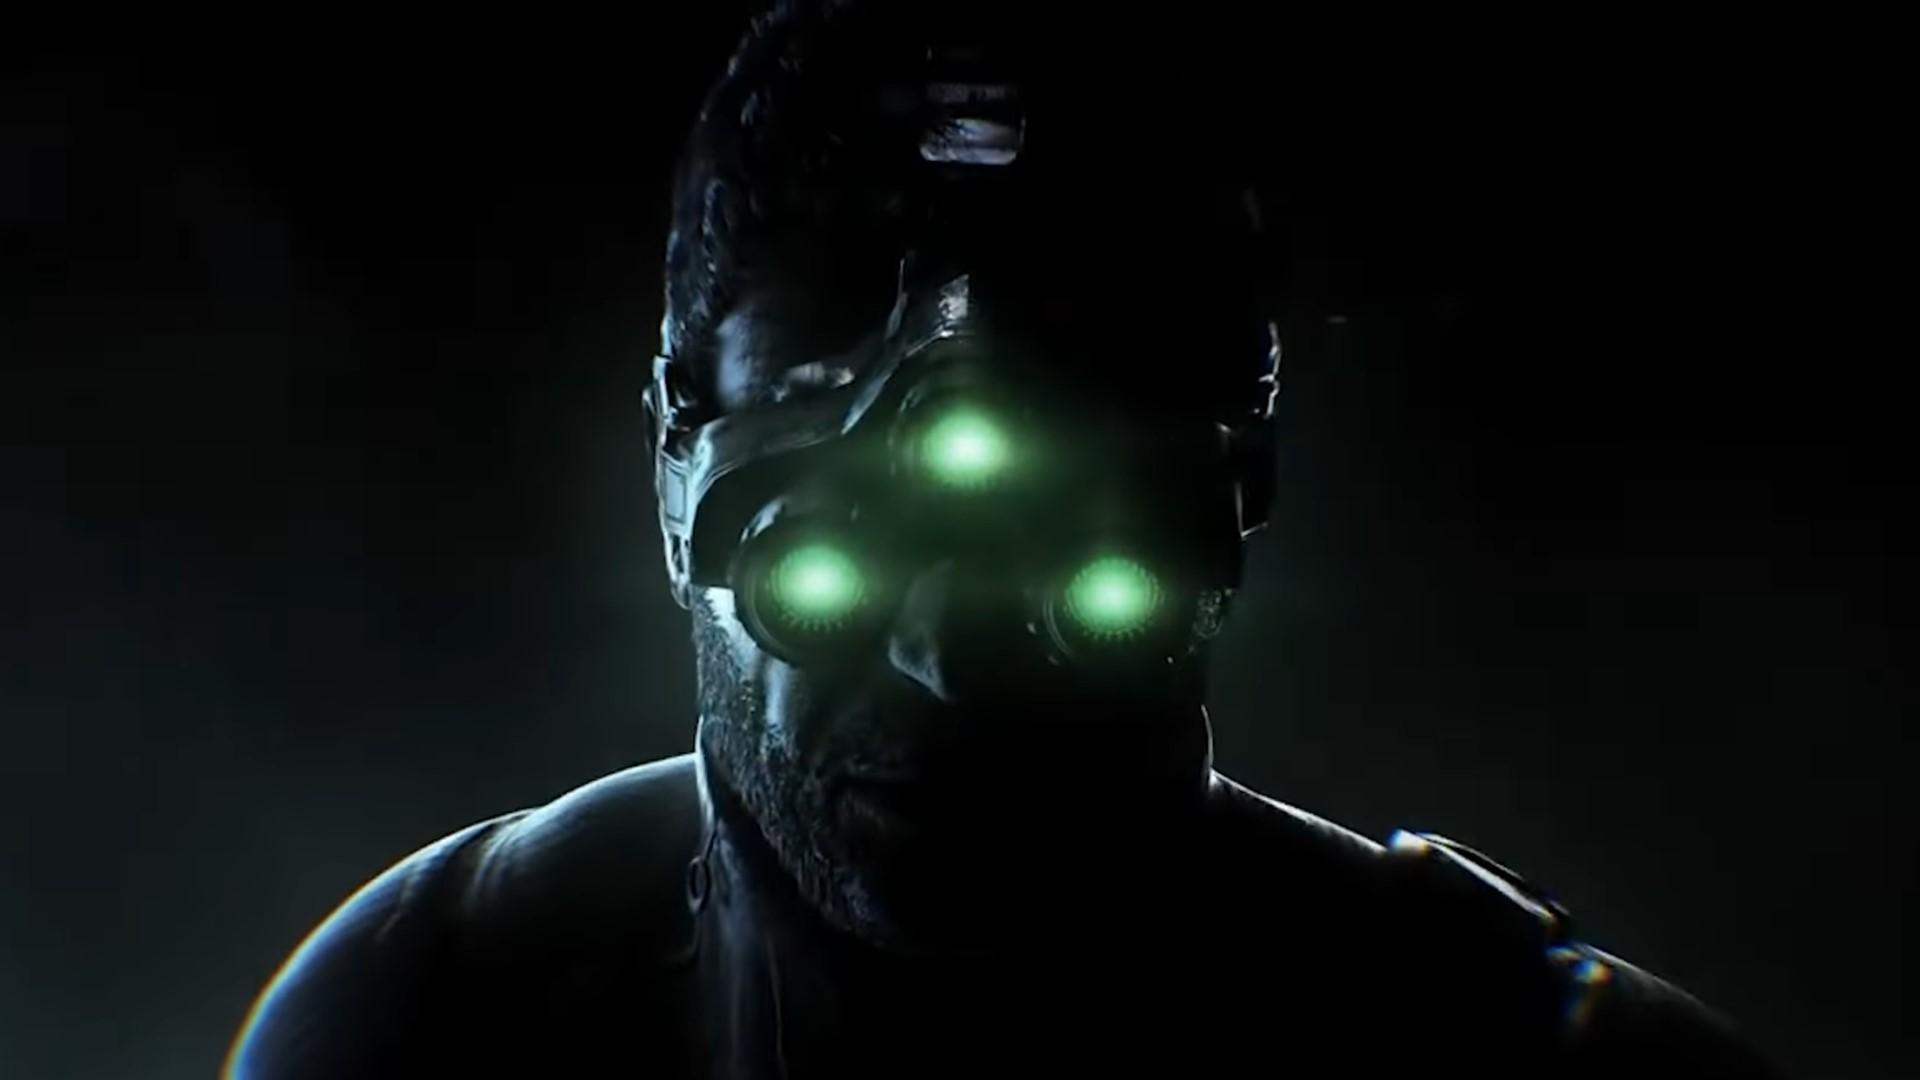 Splinter Cell remake is in the works at Ubisoft, but it’s a long way off